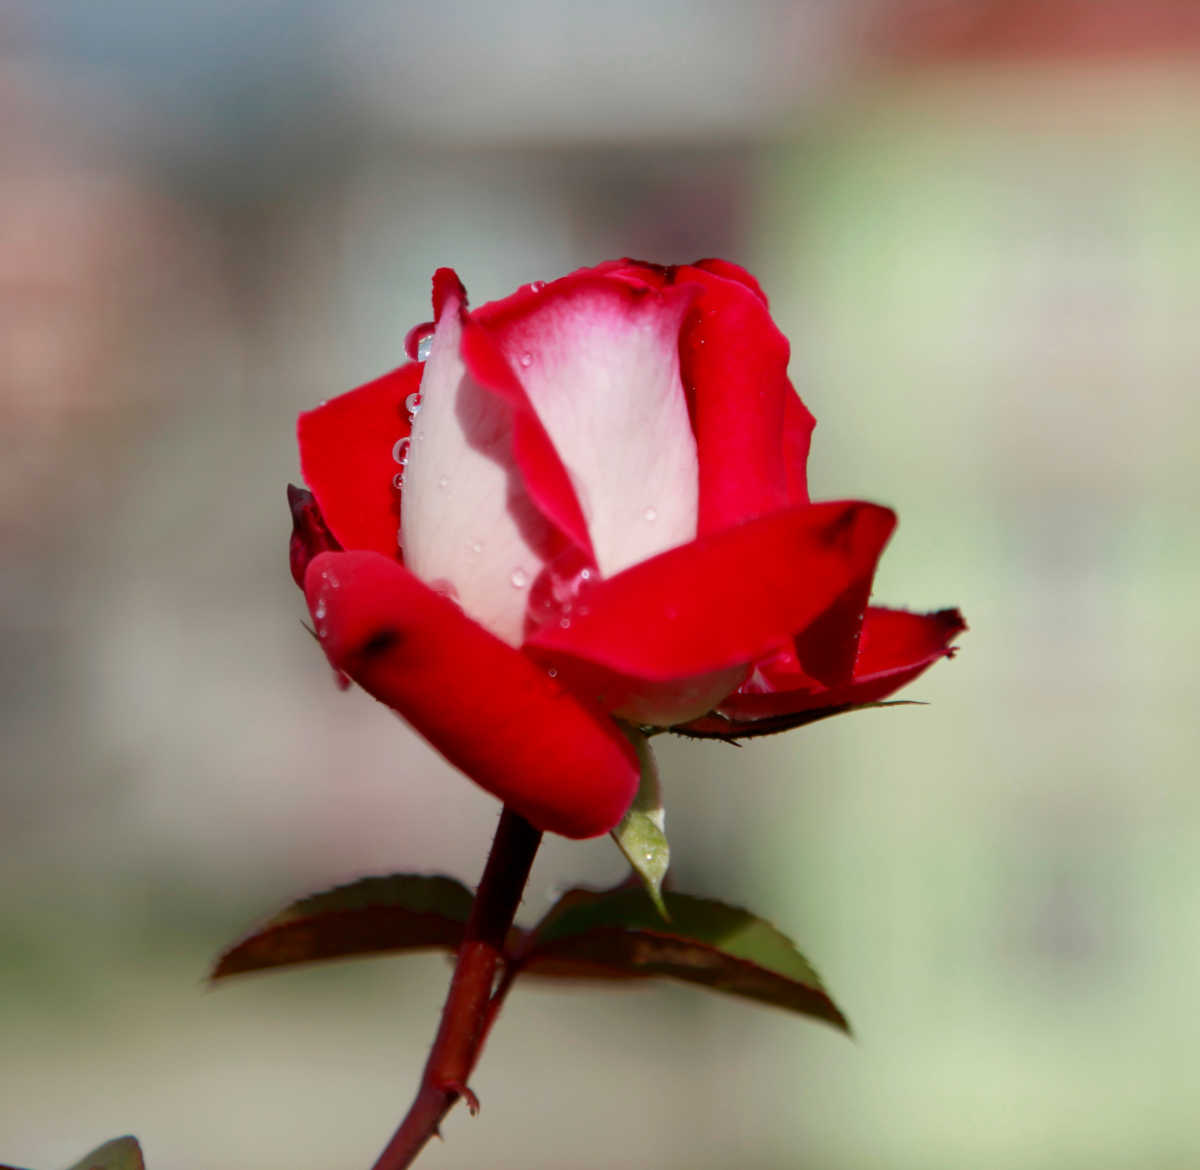 Osiria rose flower with red and white coloring.